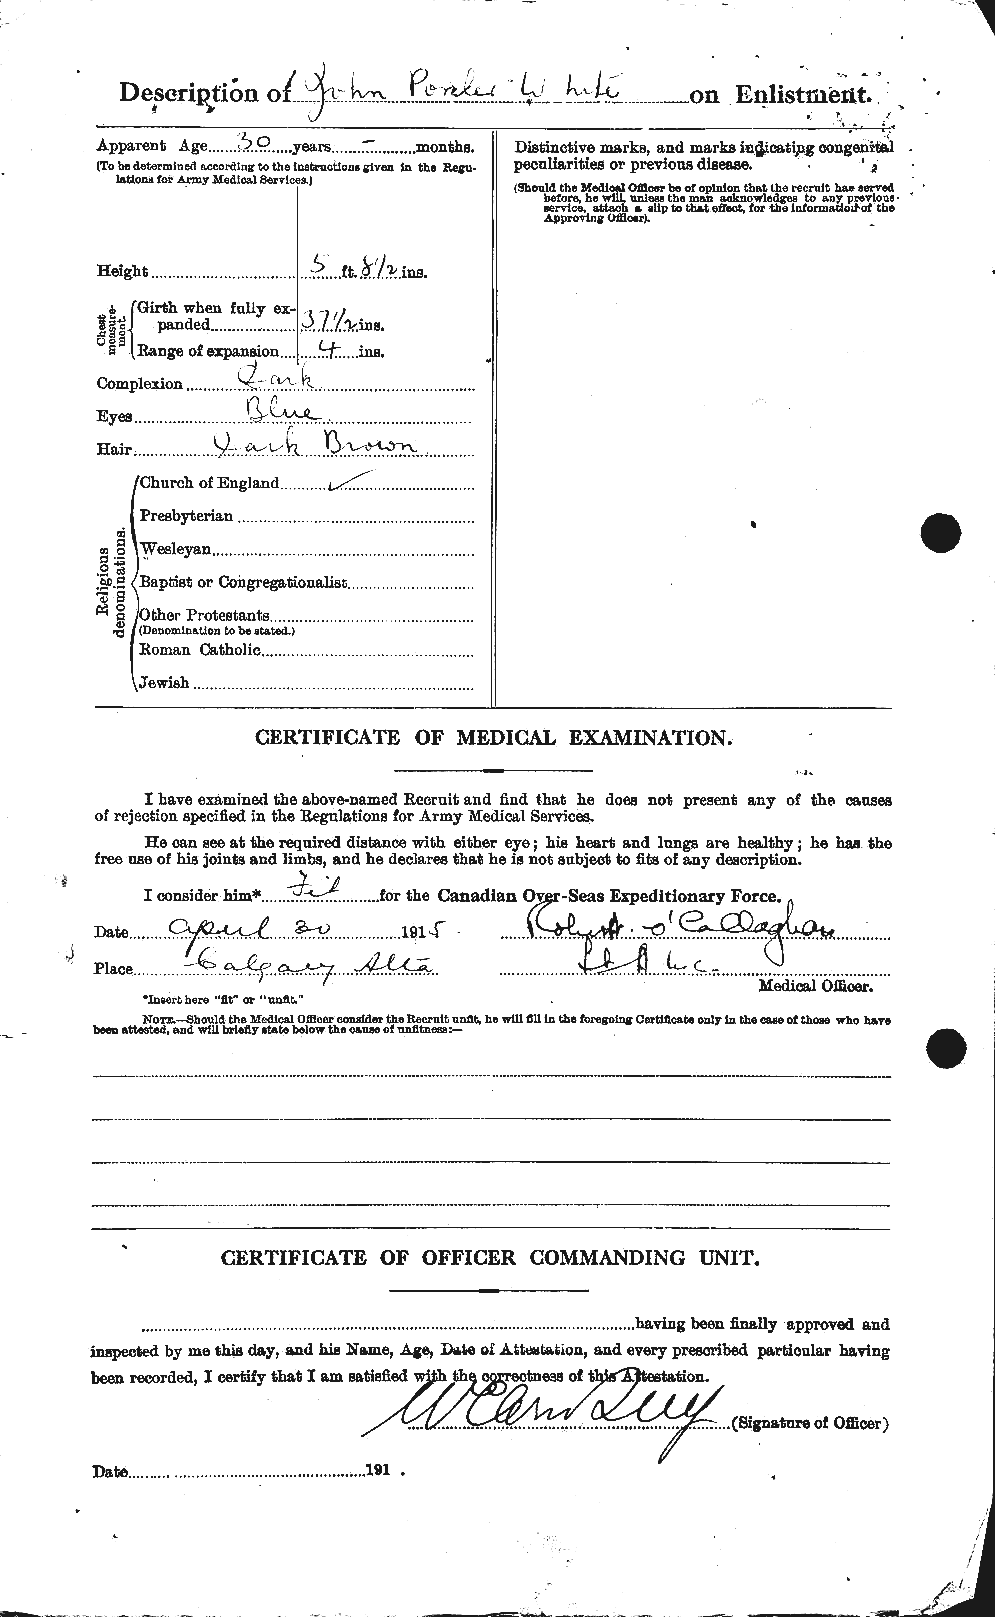 Personnel Records of the First World War - CEF 671588b